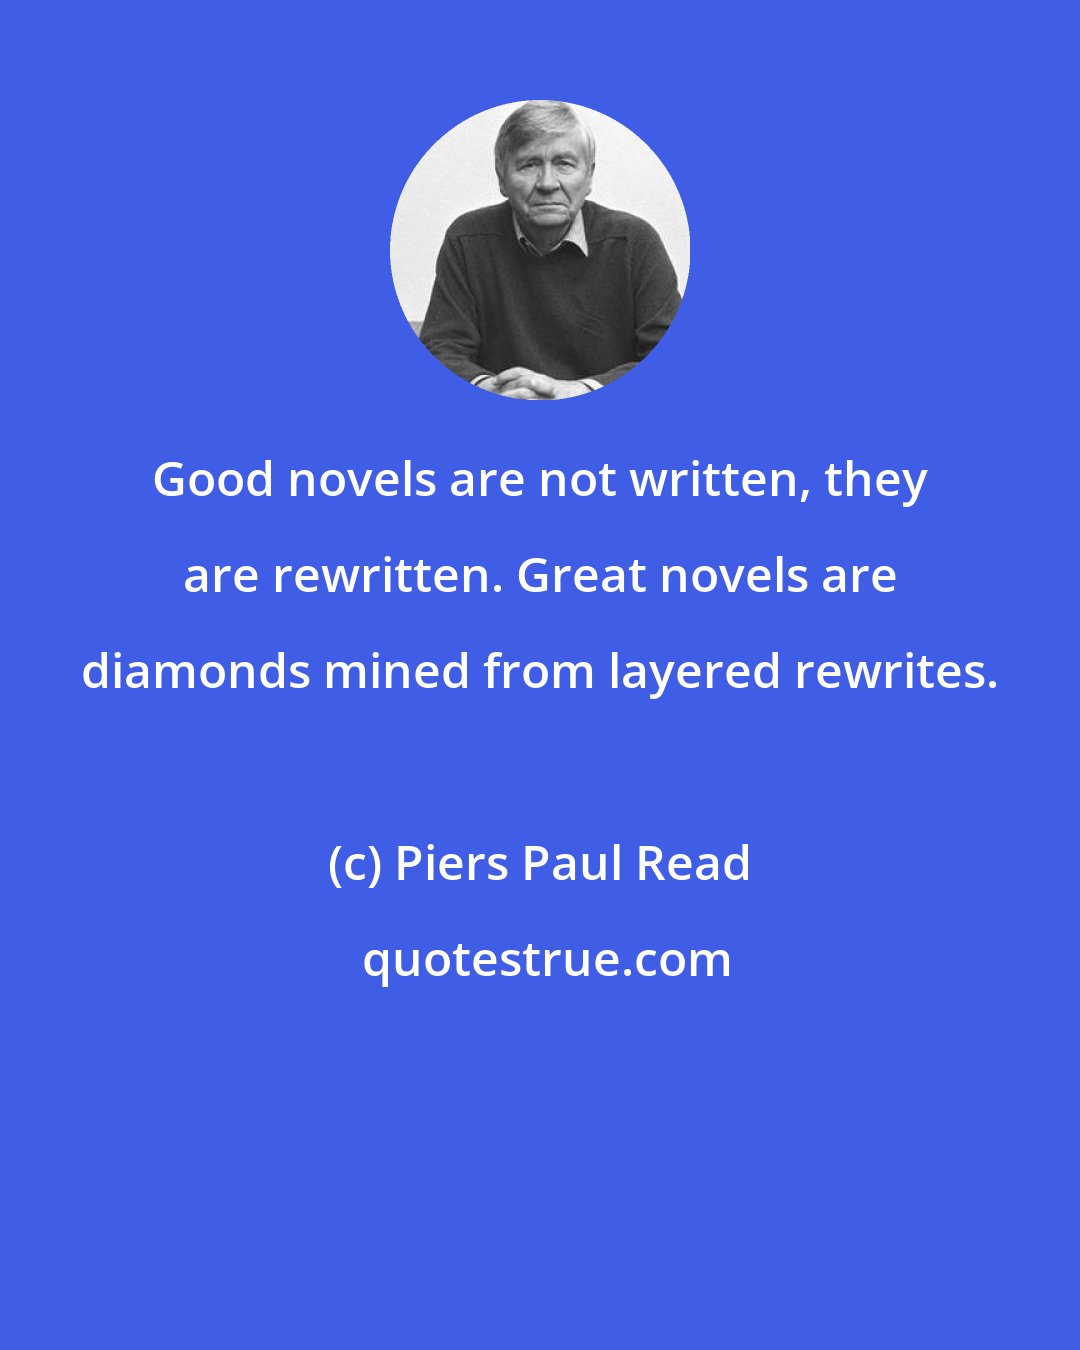 Piers Paul Read: Good novels are not written, they are rewritten. Great novels are diamonds mined from layered rewrites.